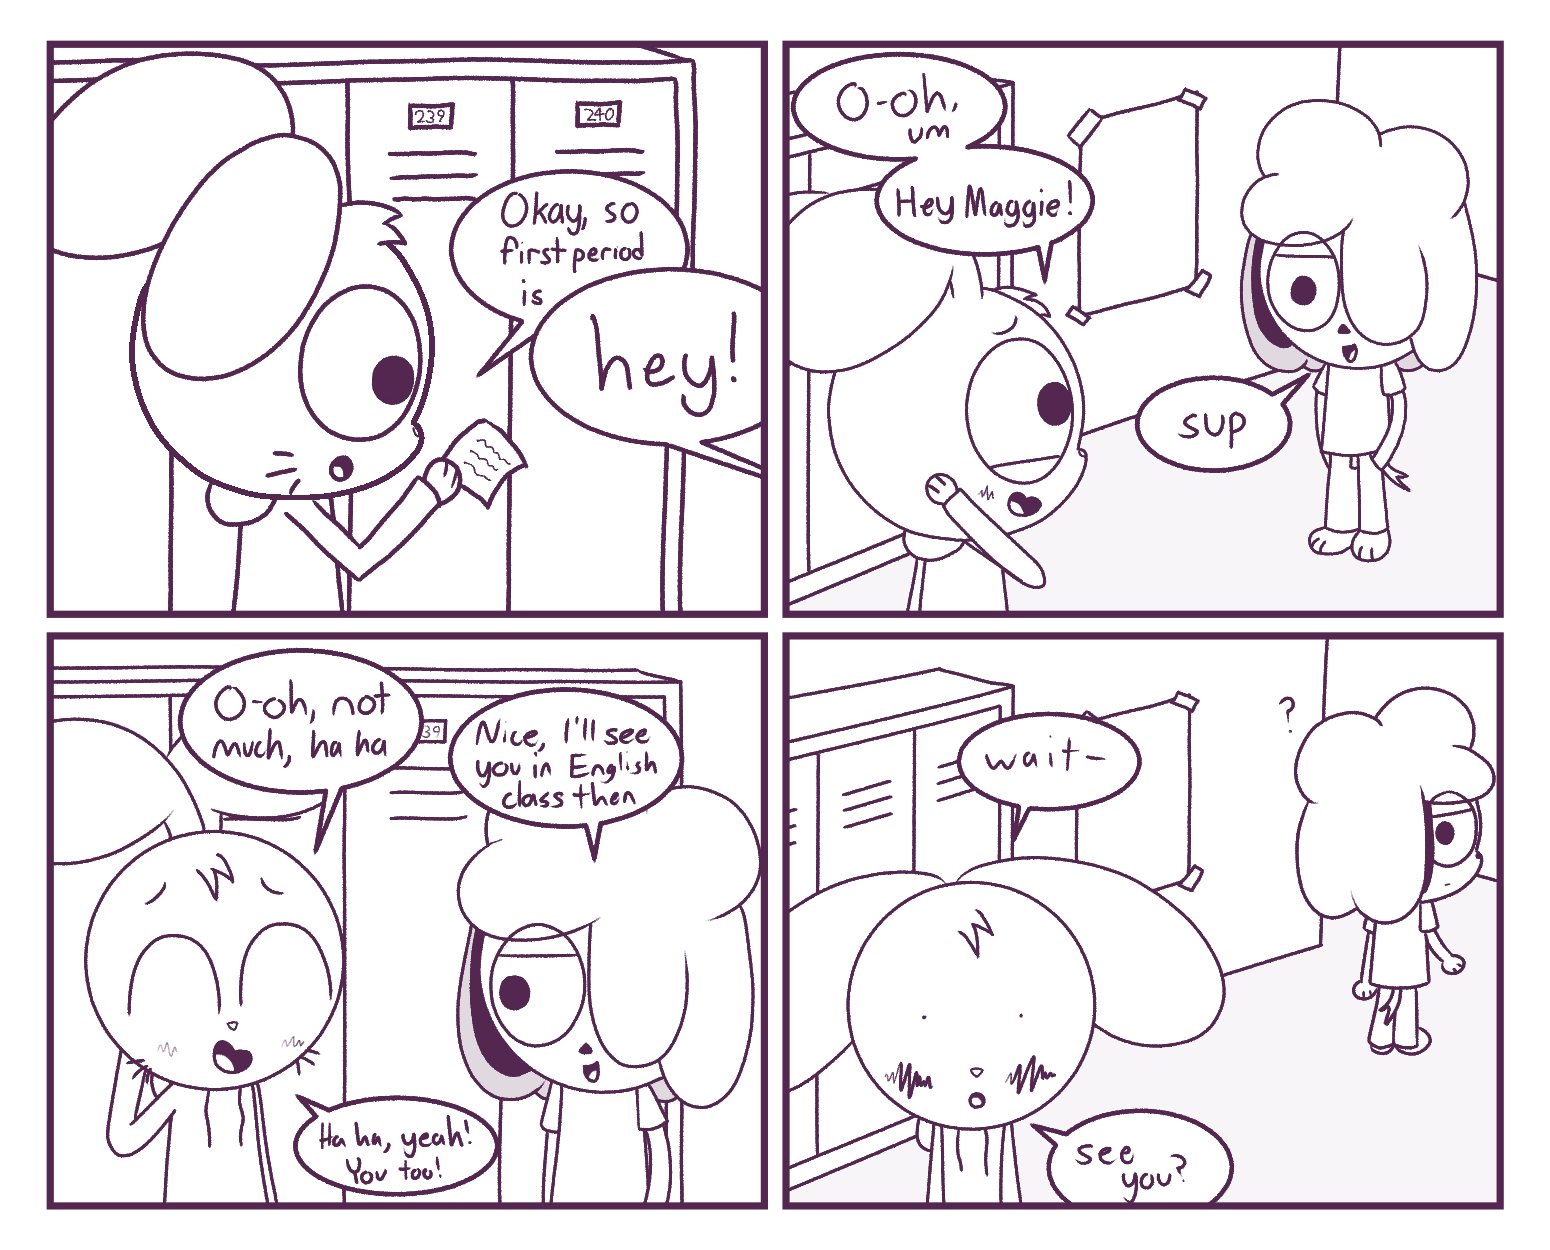 Panel 1: Hazel: Okay, so first period is- / Maggie: hey! | Panel 2: Hazel: O-oh, um, hey Maggie! / Maggie: sup | Panel 3: Hazel: O-oh, not much, haha / Maggie: Nice, I'll see you in English class then / Hazel: Haha, yeah! You too! | Panel 4: Hazel: wait-... see you?